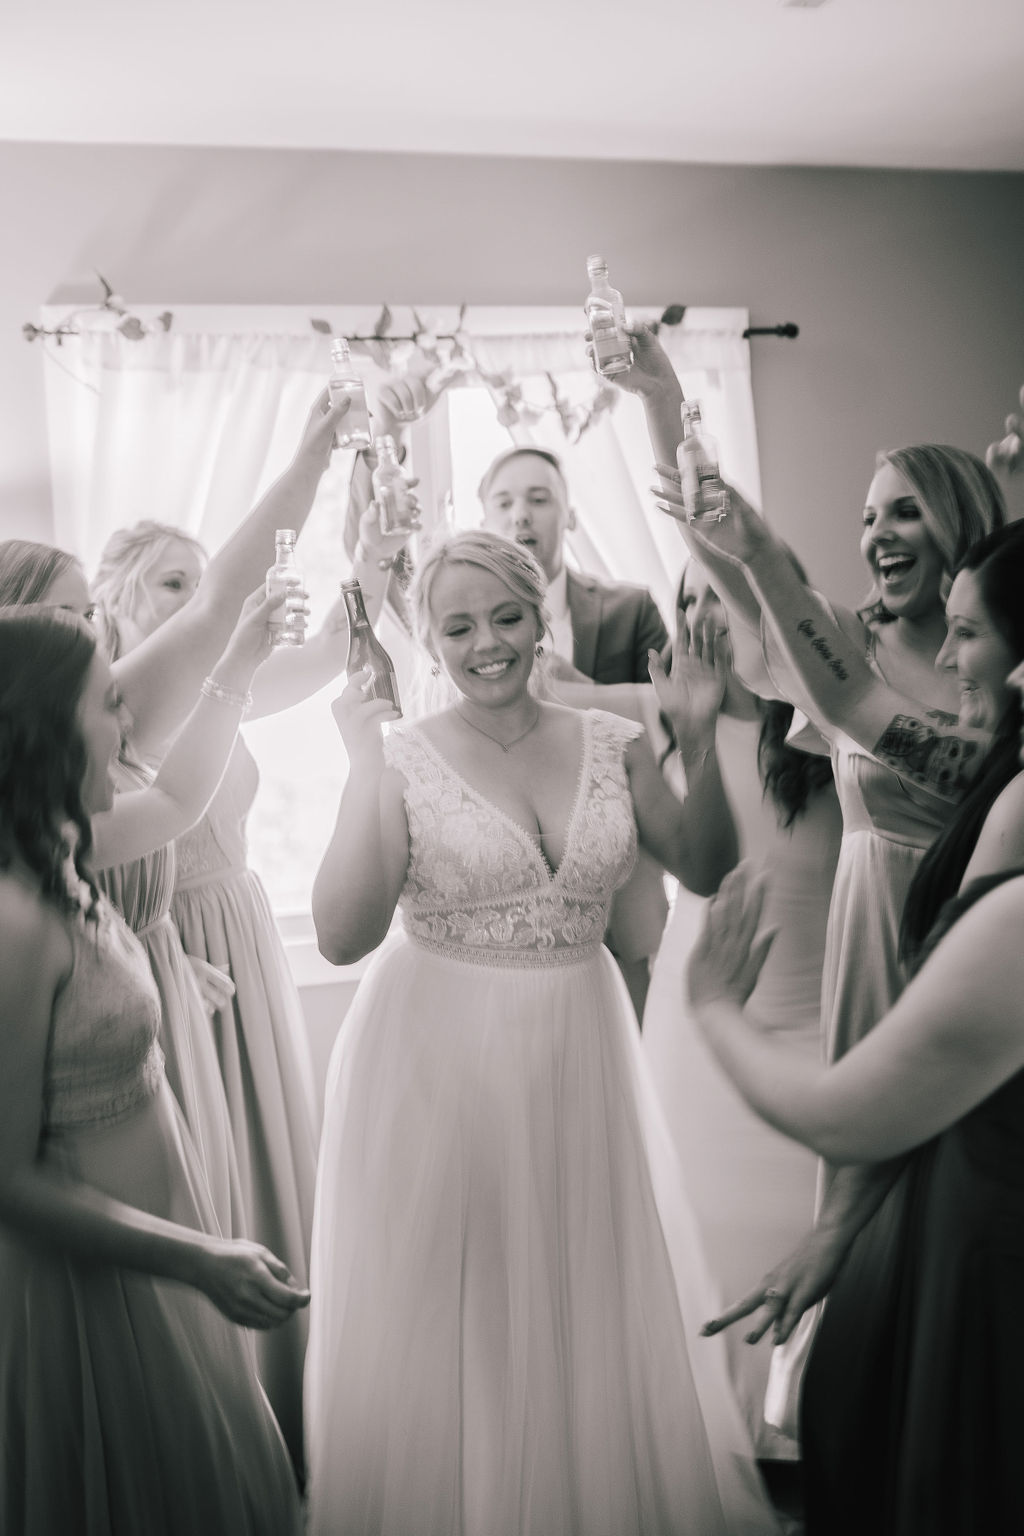 black and white photo of the bridal party havign a cheers befre the wedding